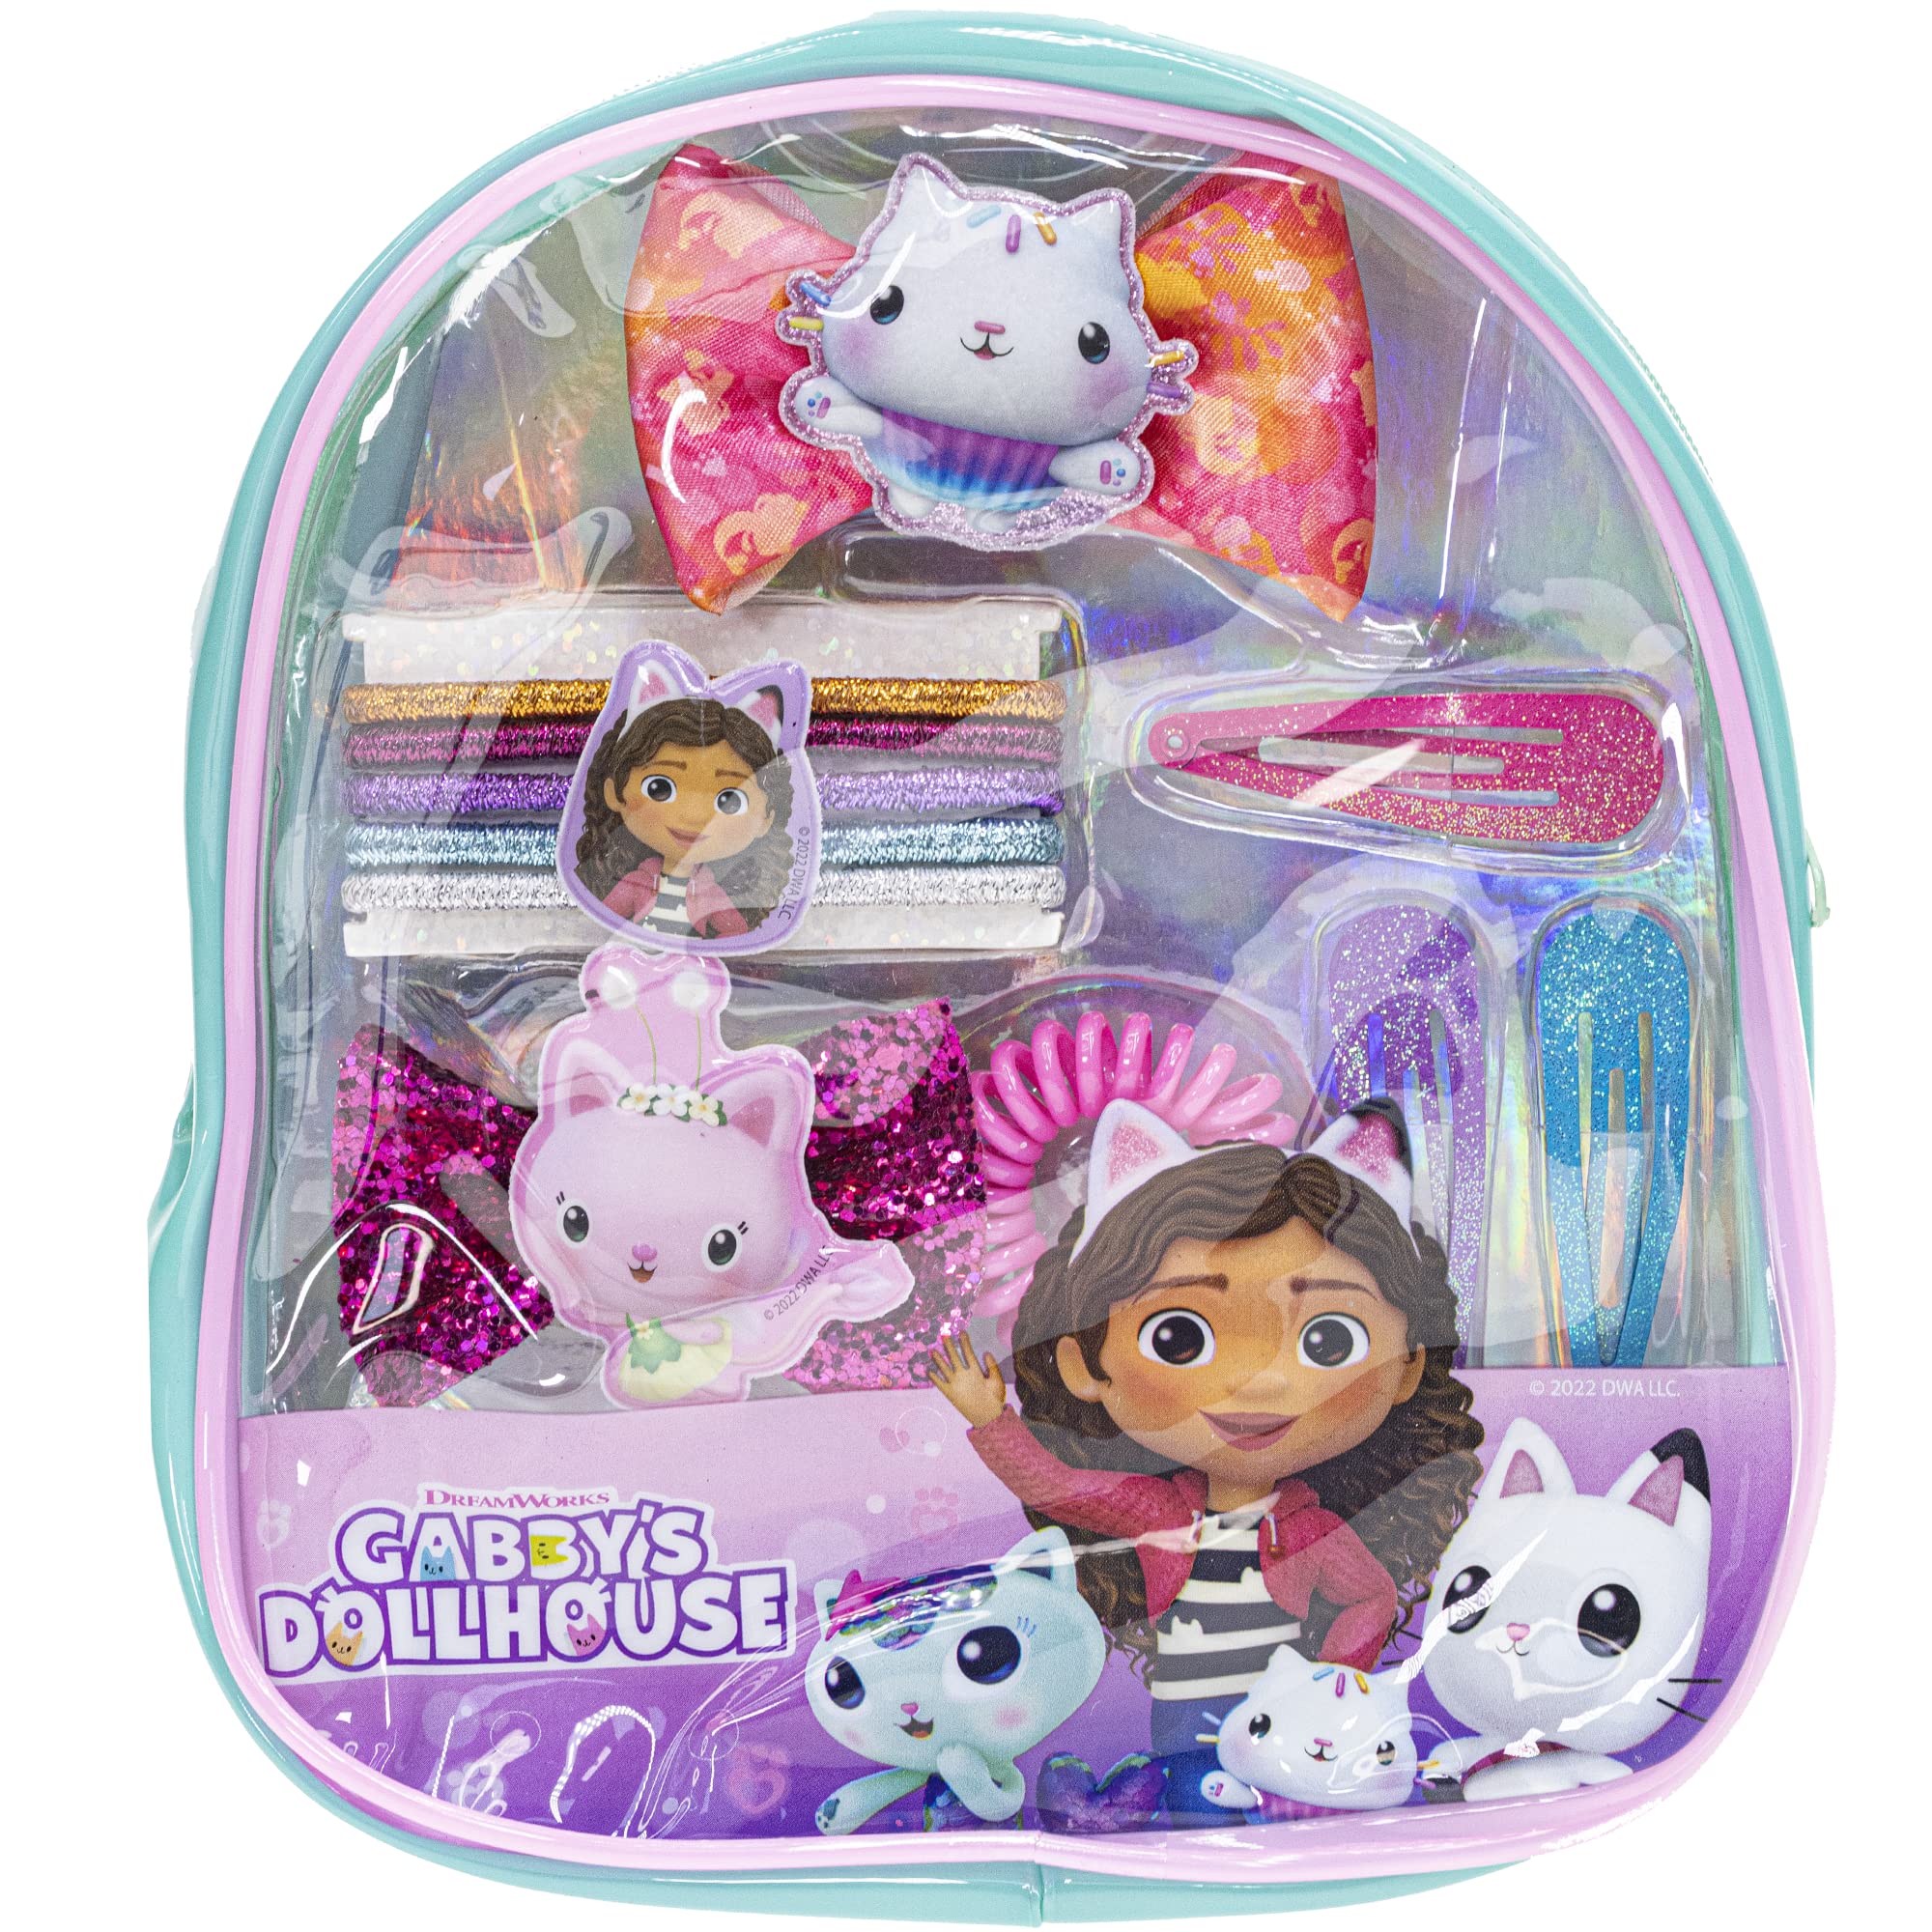 Gabby's Dollhouse Dress Up Accessories Set - Bundle with Bracelets, Hair  Clips, Stickers, Tattoos, and More | Gabby's Dollhouse Accessories for Girls